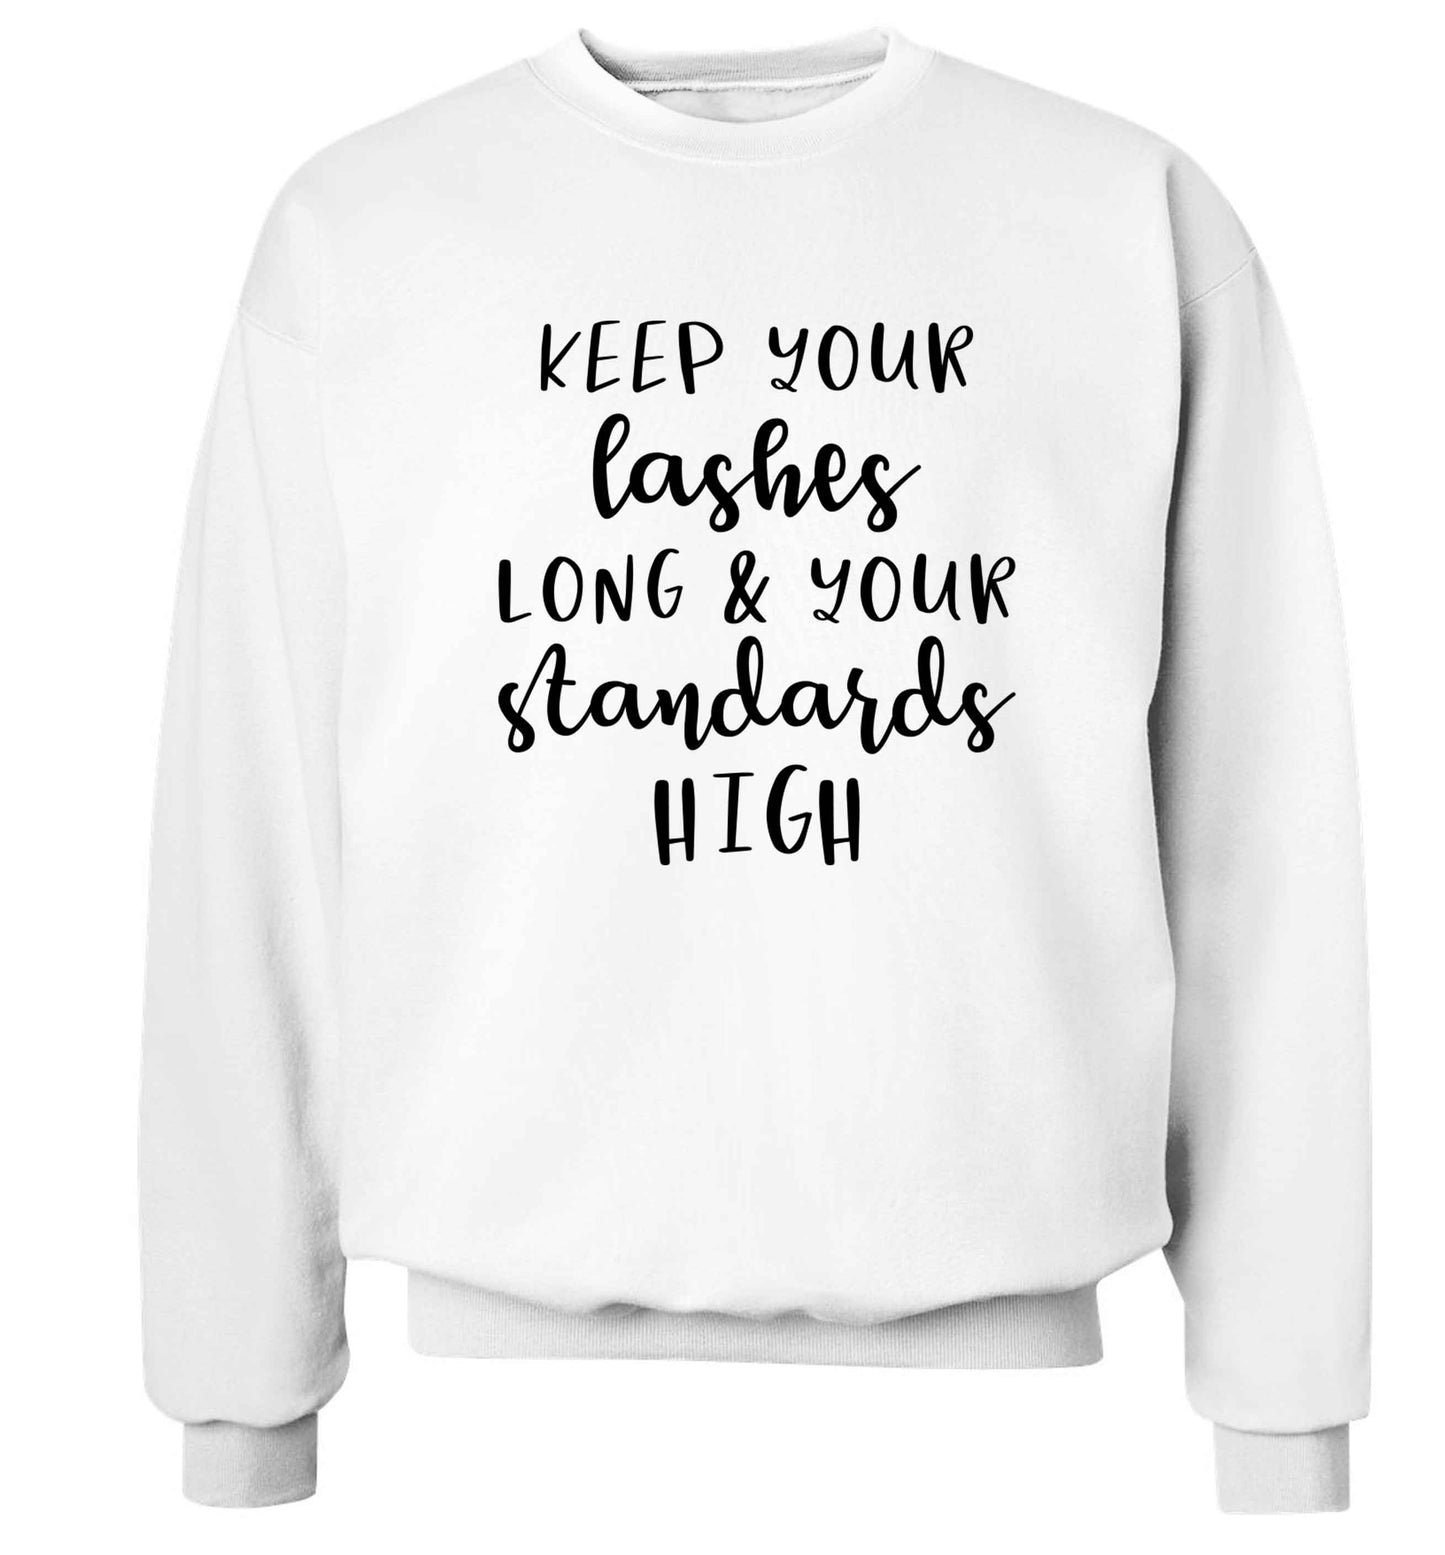 Keep your lashes long and your standards high Adult's unisex white Sweater 2XL